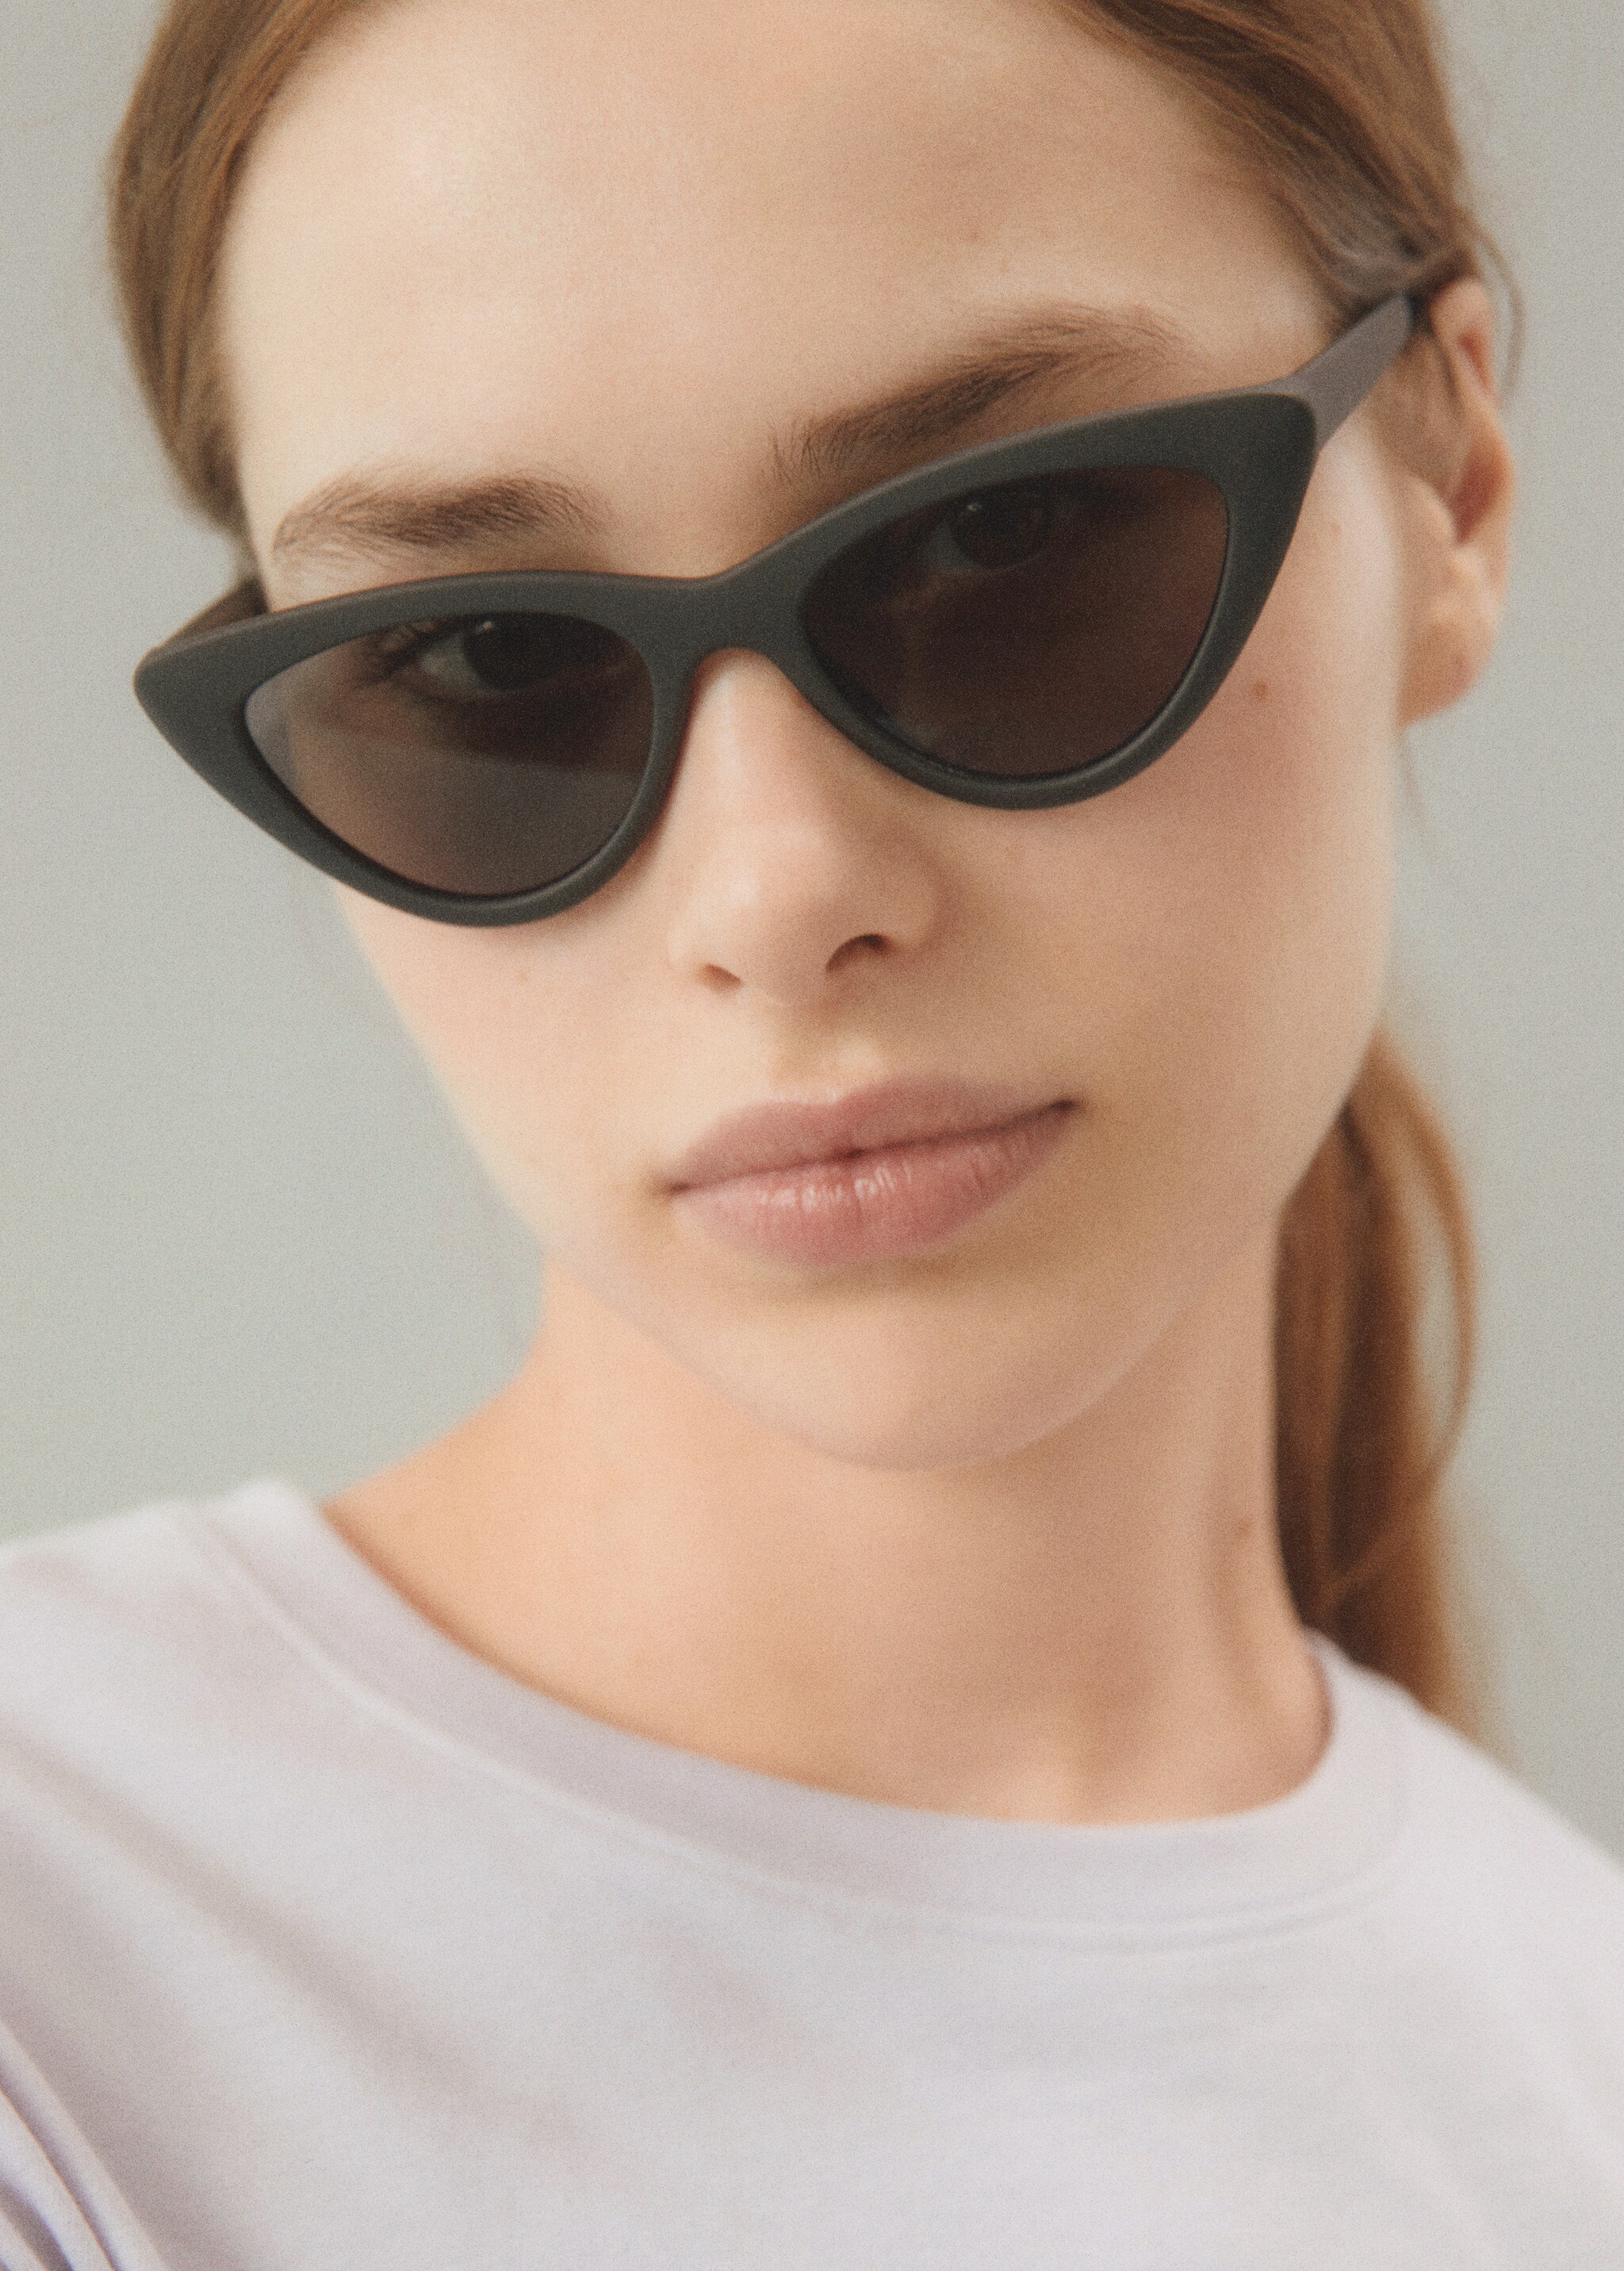 Retro style sunglasses - Details of the article 6